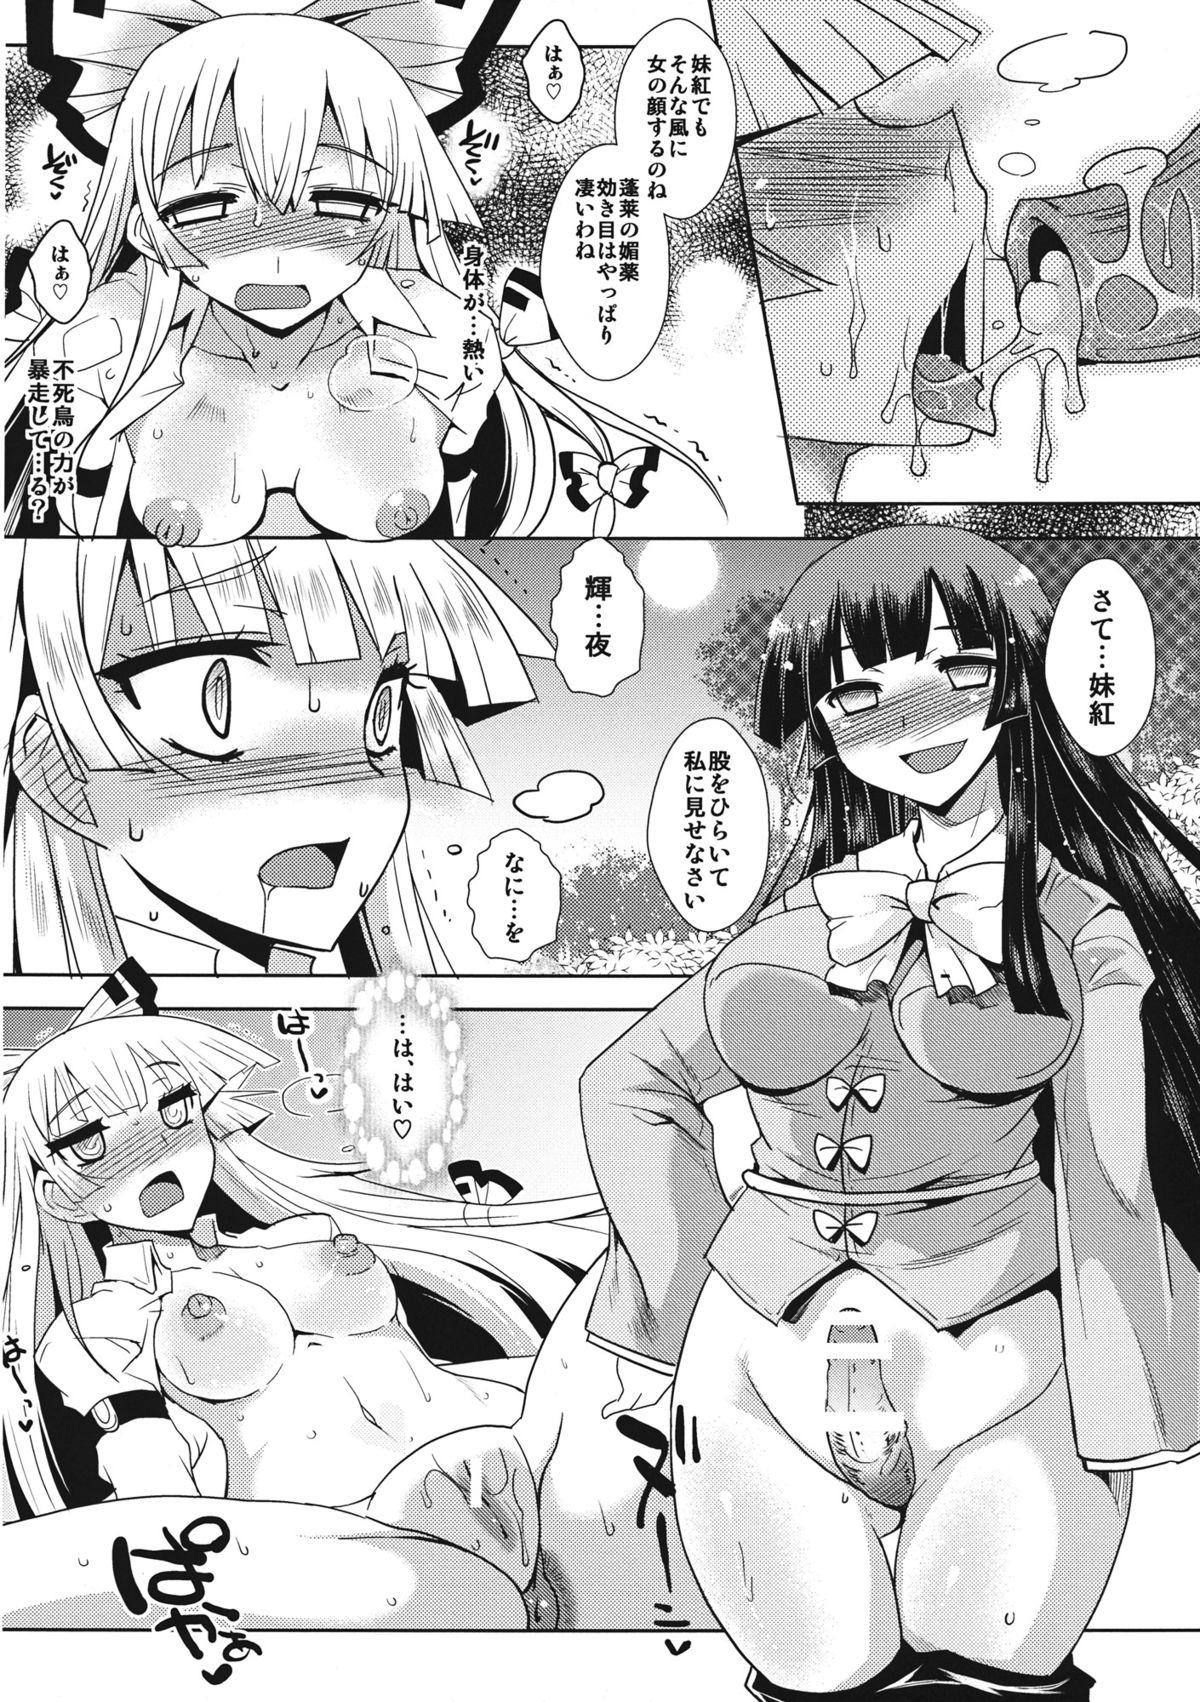 Chicks 紅月の二重奏 - Touhou project Bwc - Page 9